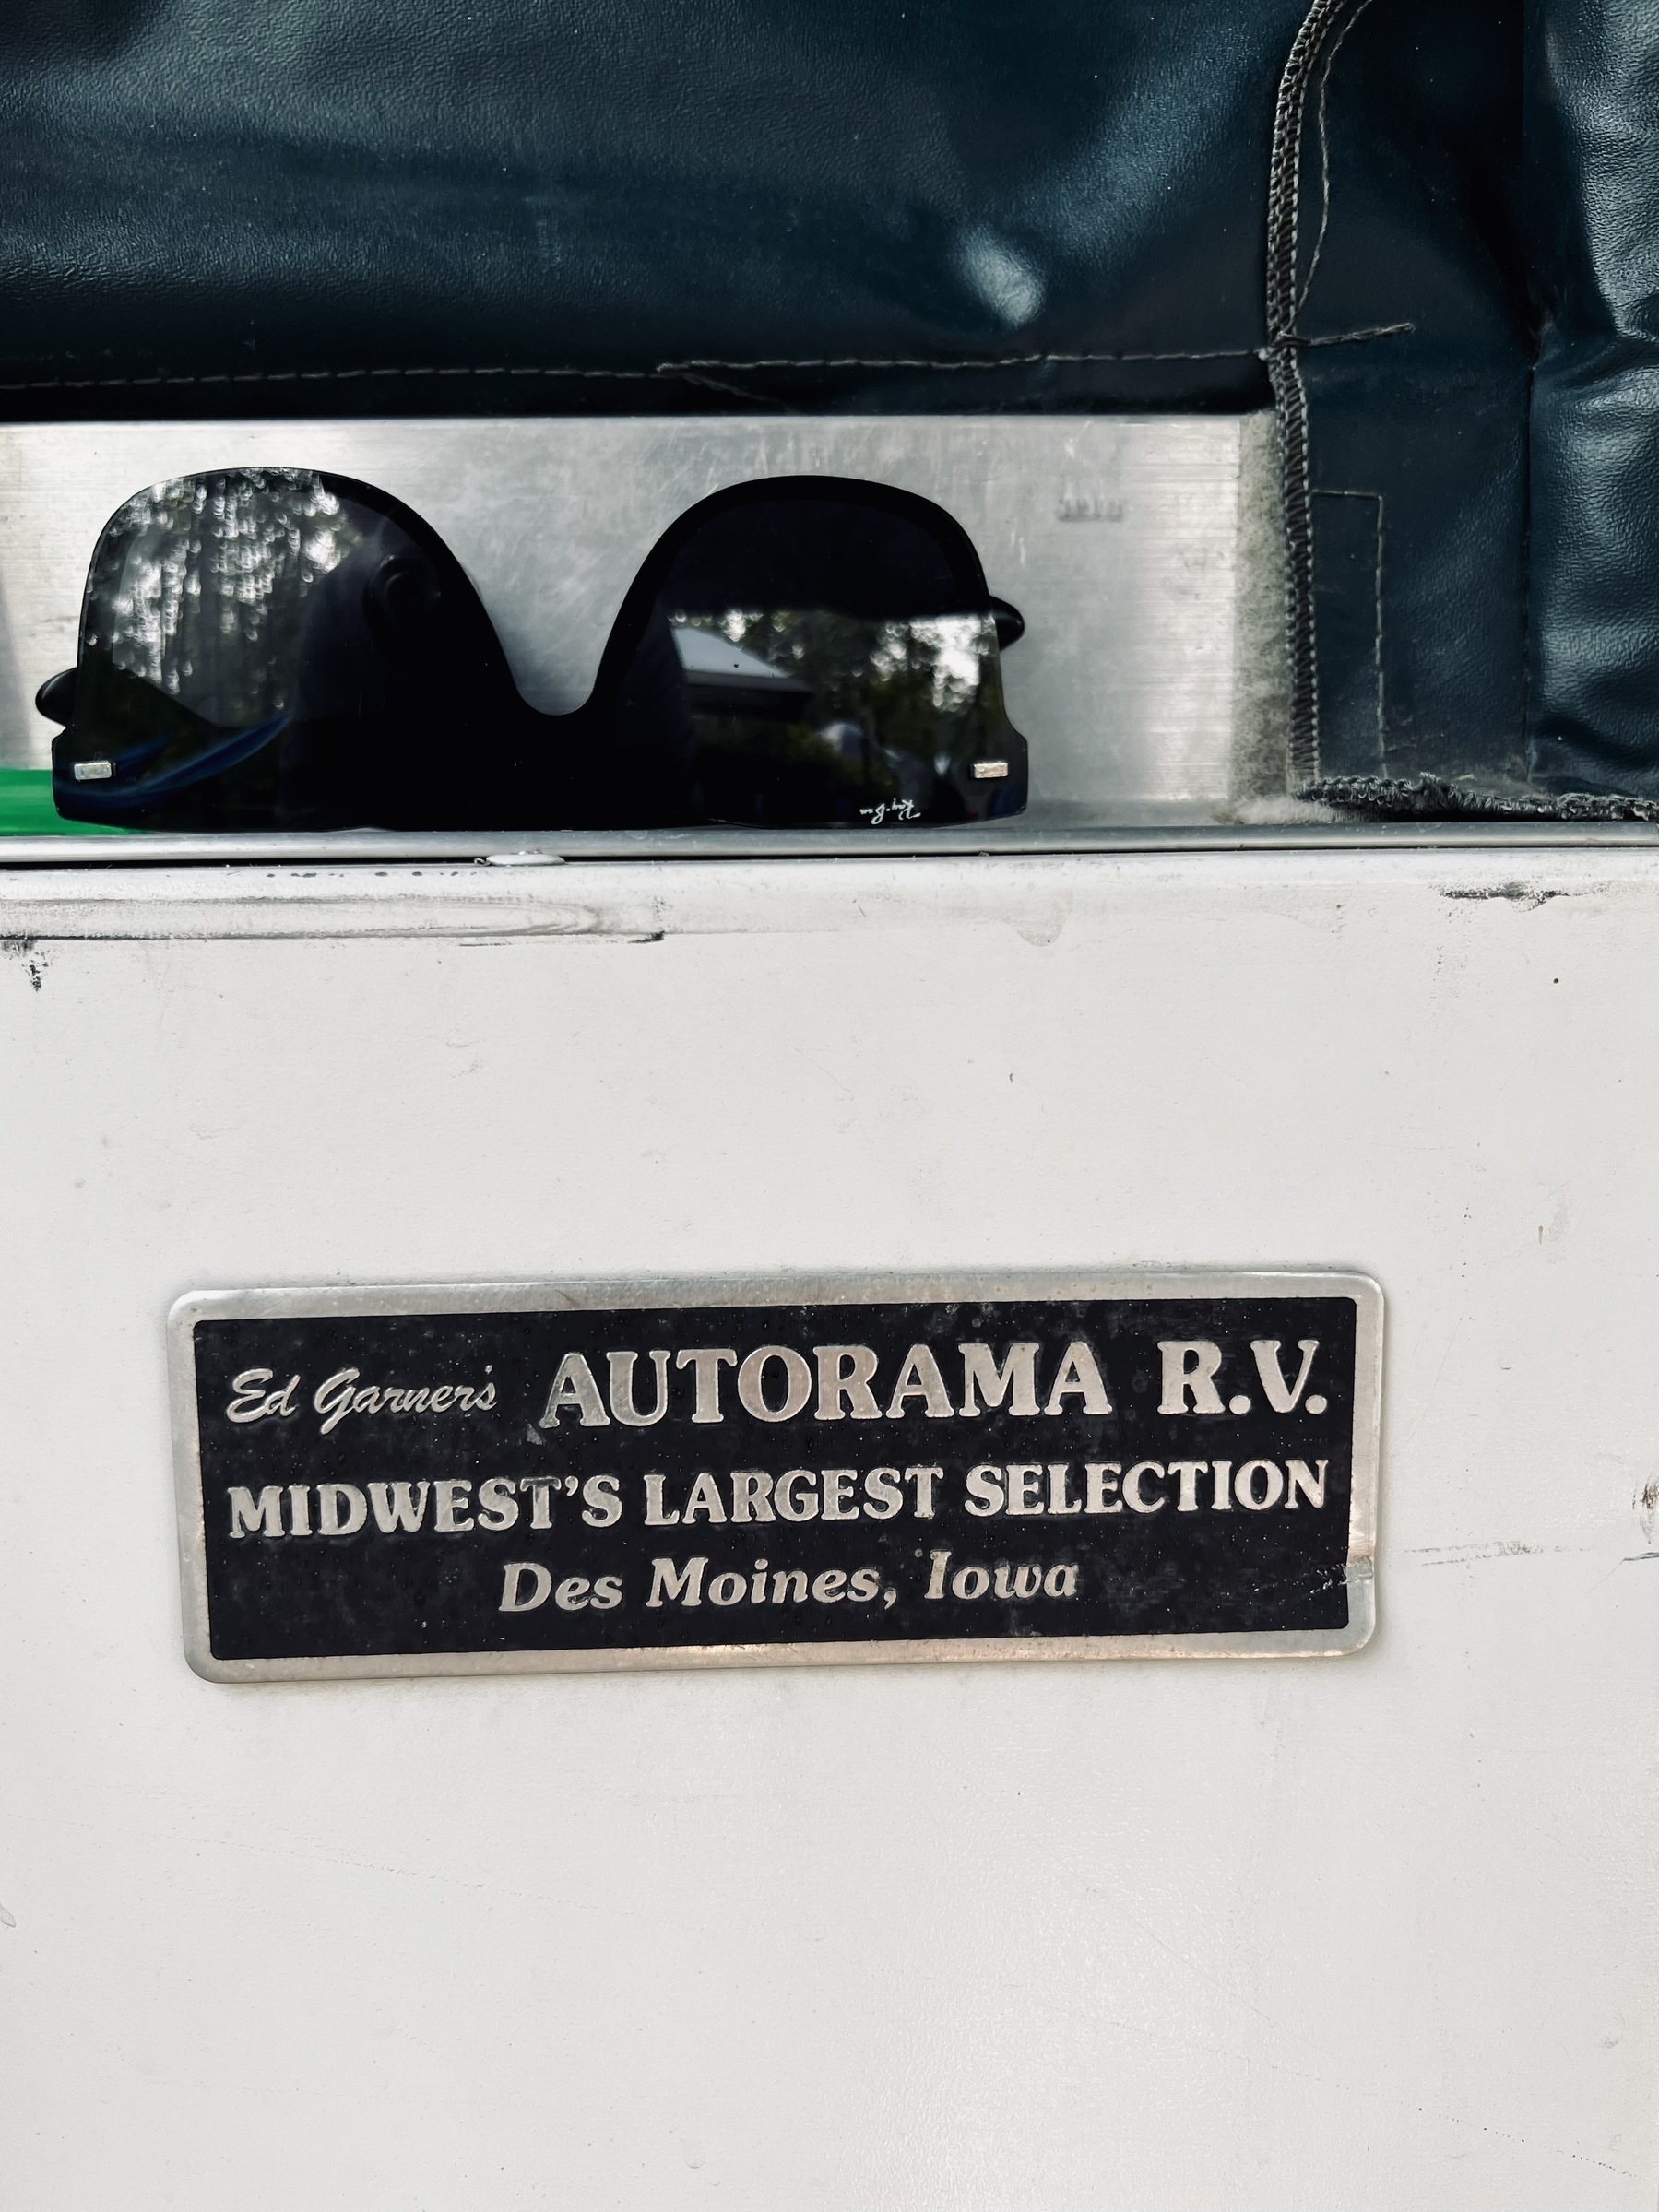 A sign on the side of a trailer that reads Ed Garner’s Autorama RV in Des Moines, Iowa